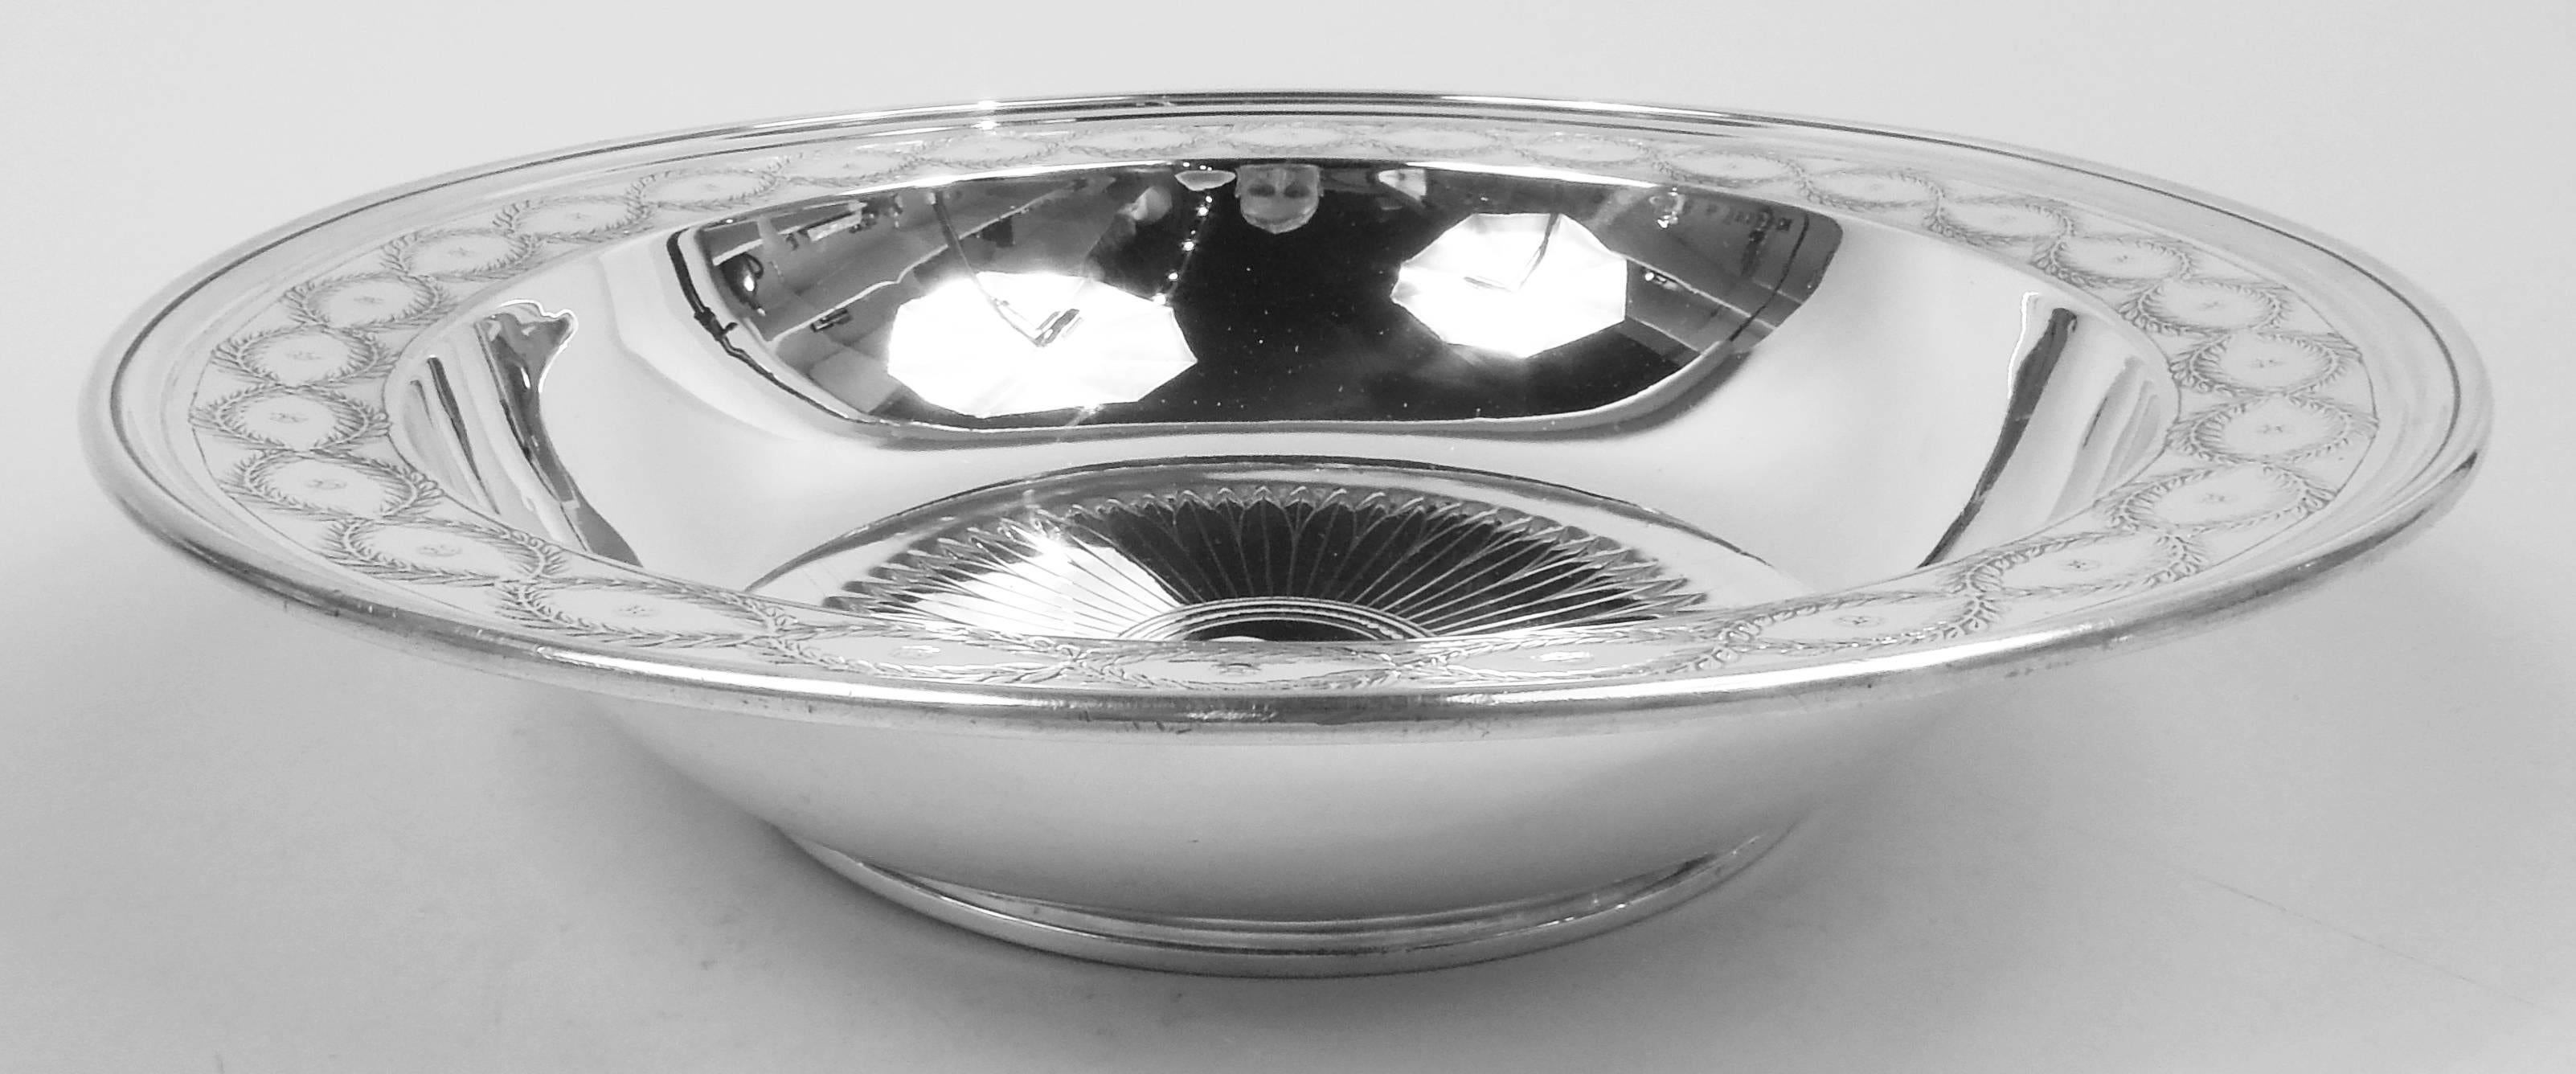 Winthrop sterling silver bowl. Made by Tiffany & Co. in New York, ca 1922. Curved sides and gently tapering shoulder with reeded rim; stepped foot ring. Acid-etched ornament. In well is patera comprising beaded rondel (vacant) radiating